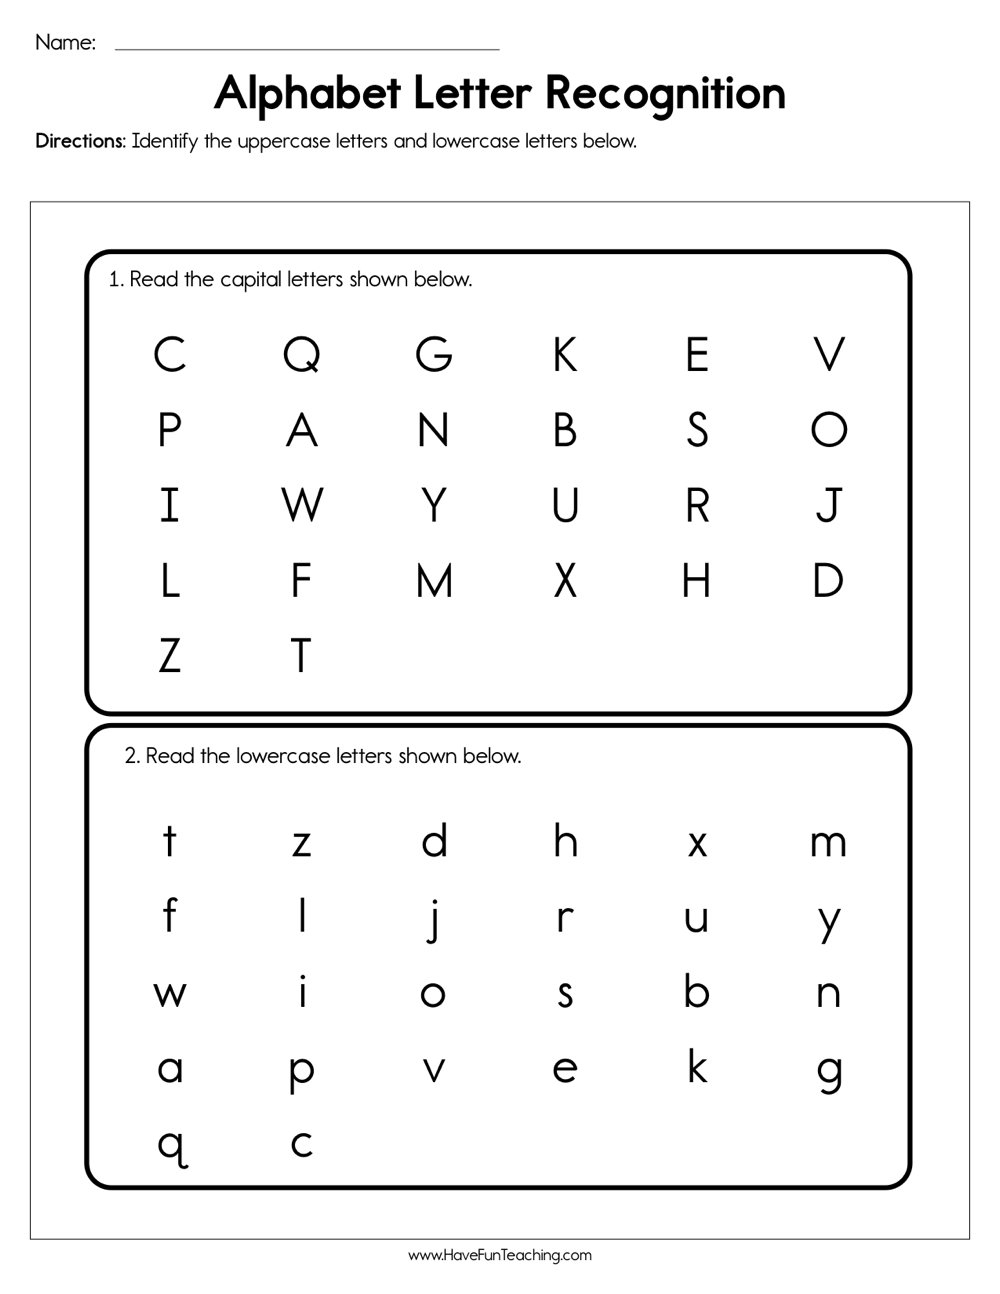 Alphabet Letter Recognition Assessment with regard to Alphabet Review Worksheets